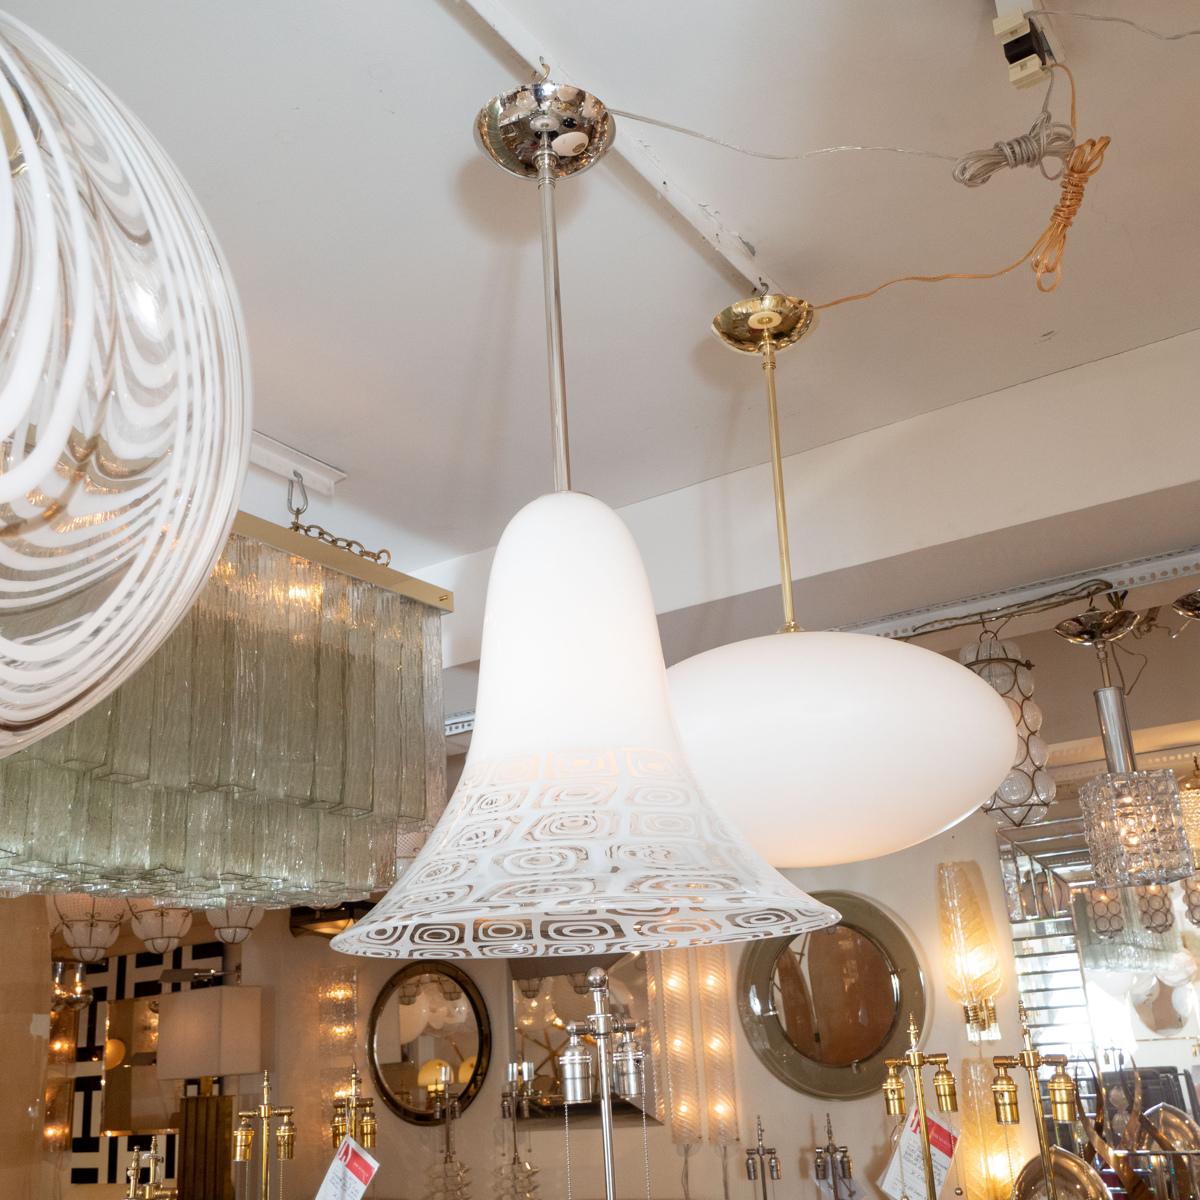 Nickel pendant fixture with white and clear patterned Murano glass bell form shade.